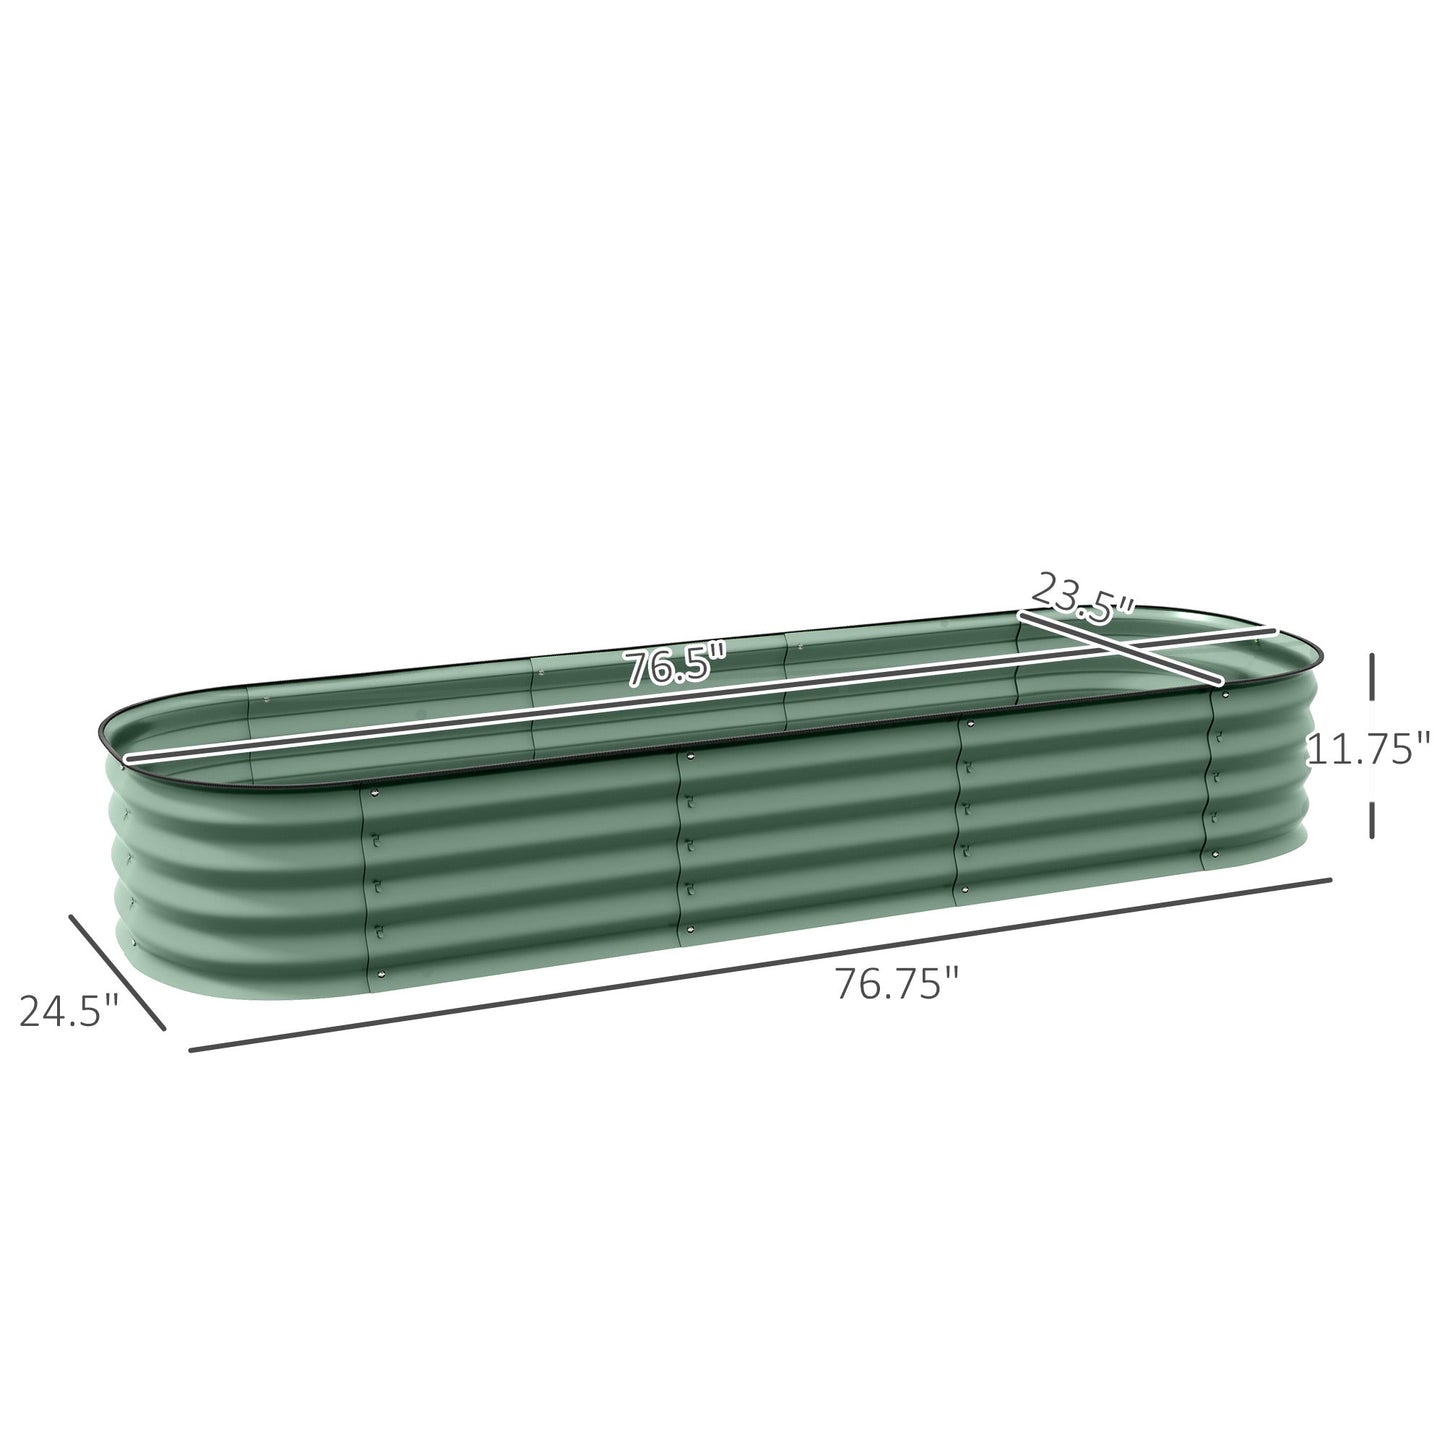 -Outsunny 6.4 x 2 x 1ft Galvanized Raised Garden Bed Kit, Metal Planter Box with Safety Edging, Green - Outdoor Style Company